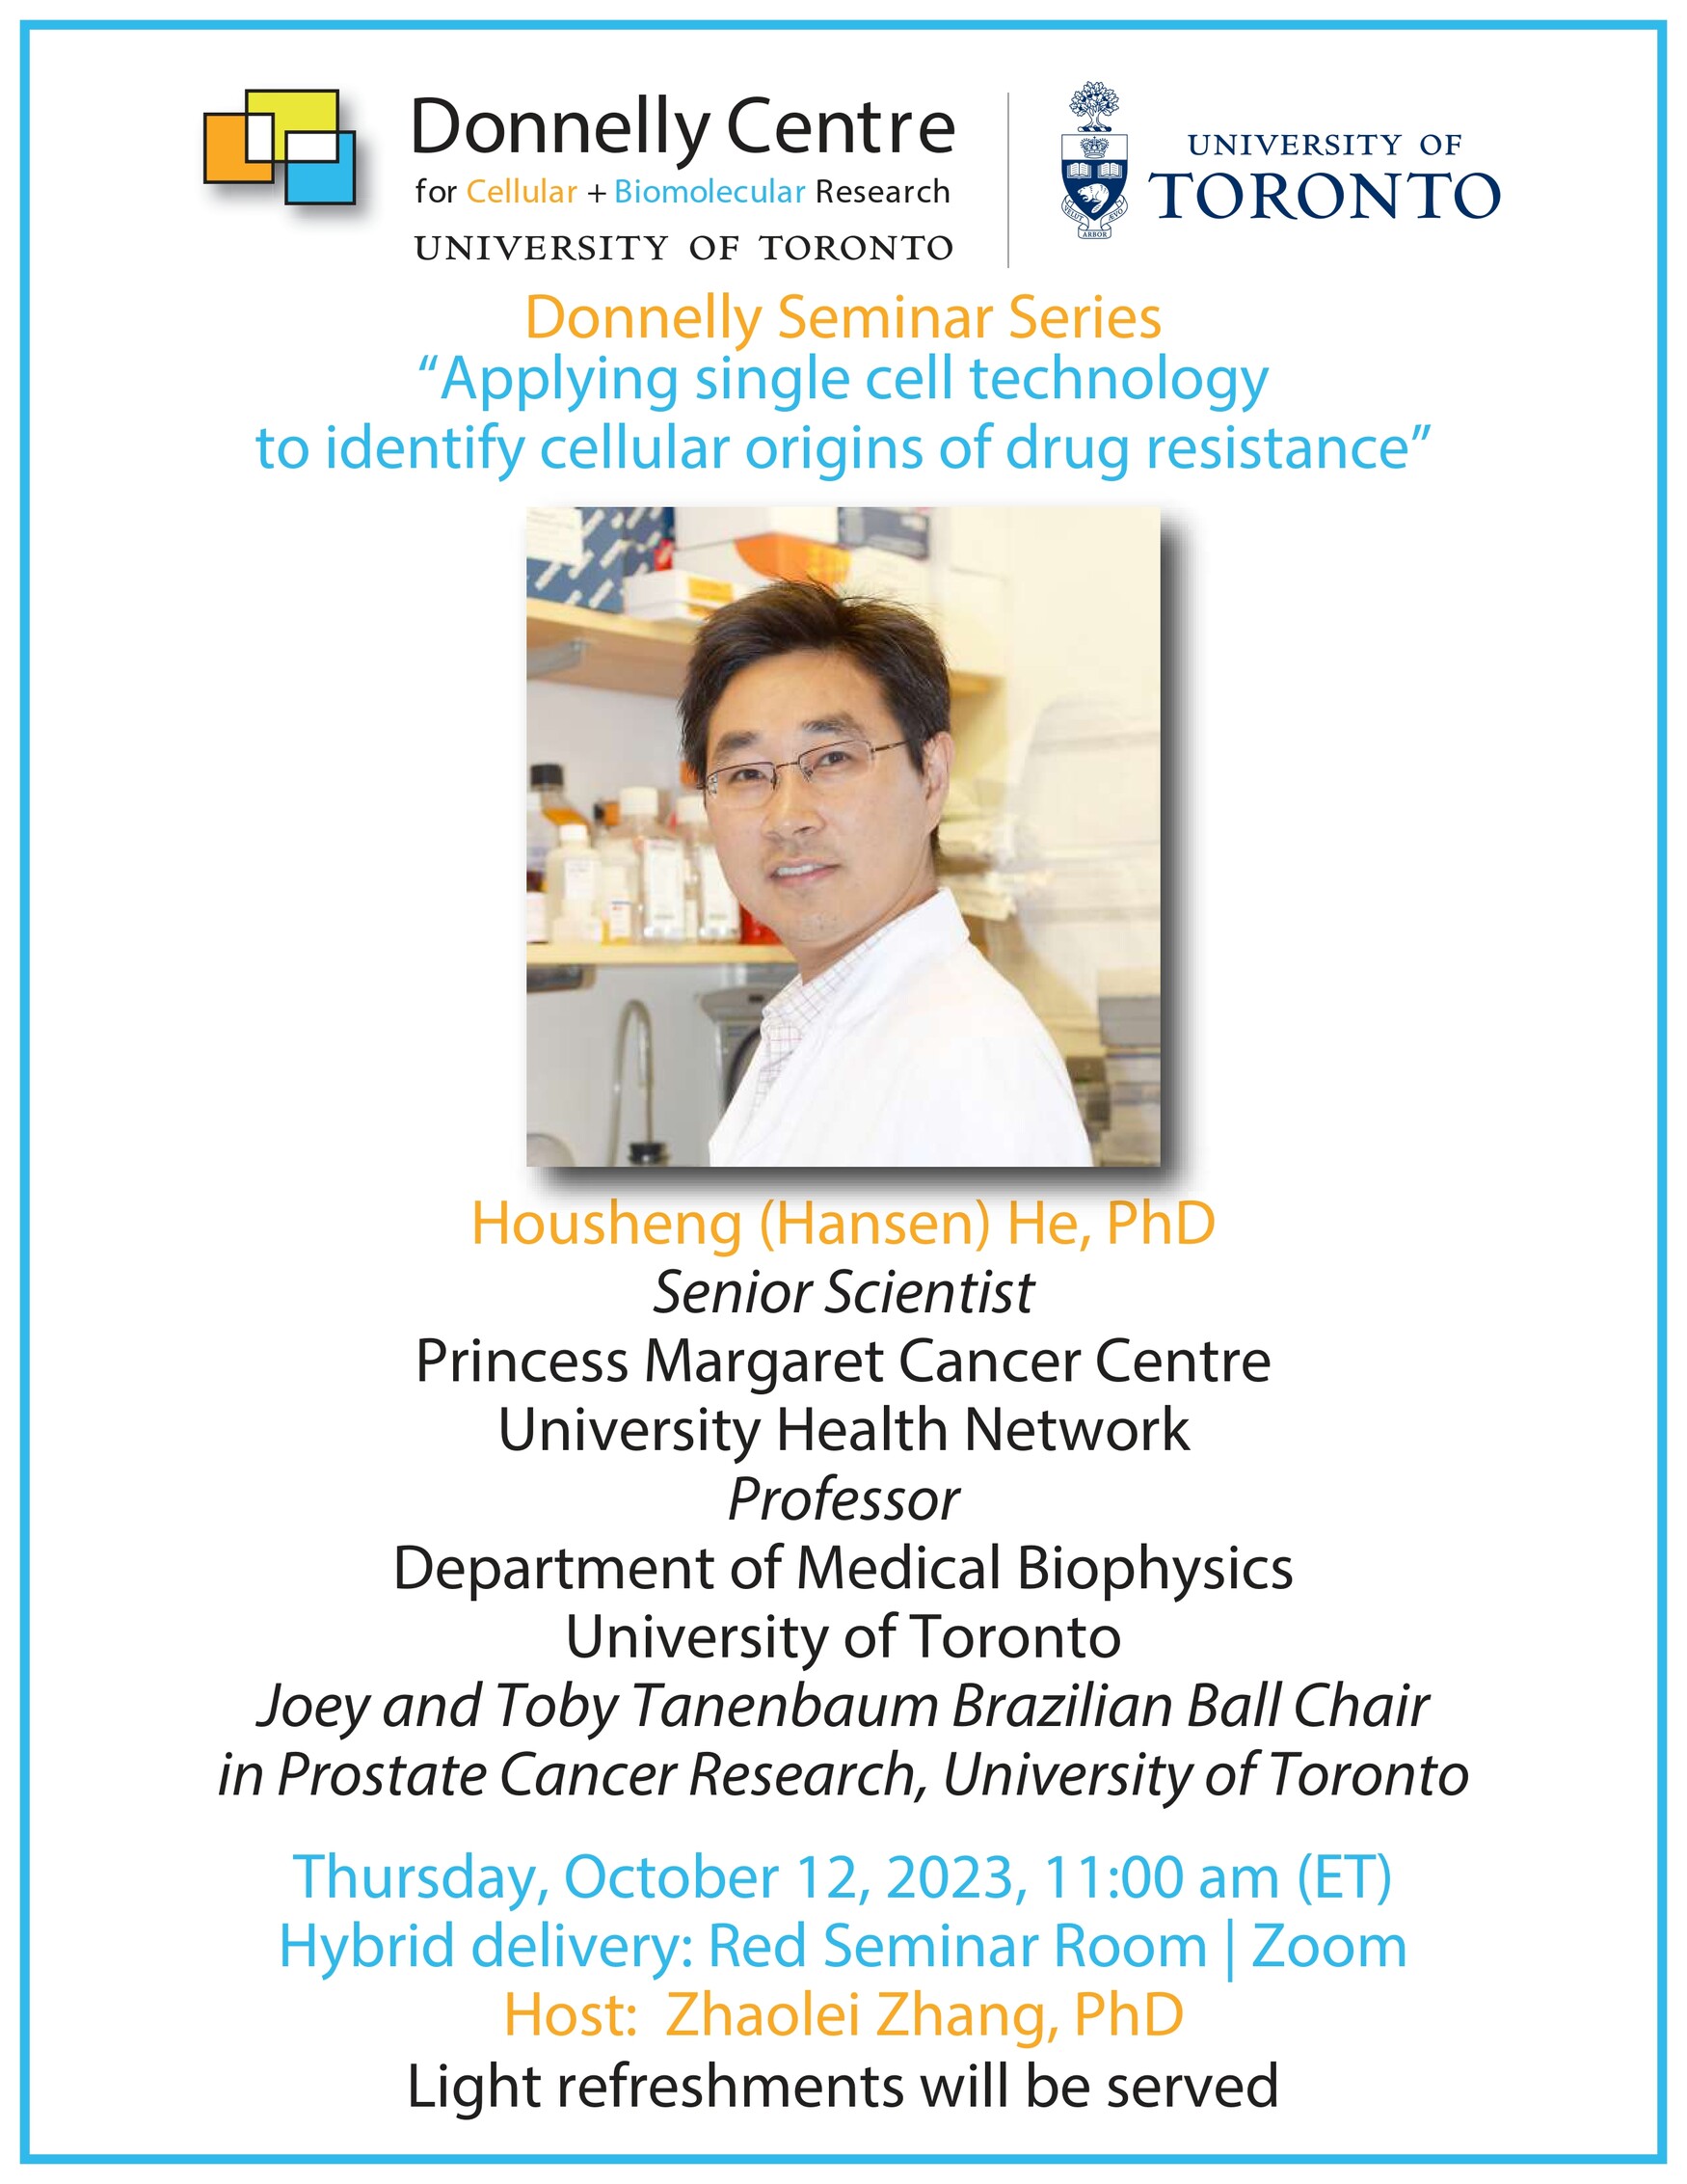 Poster for Donnelly Centre Seminar on "Applying Single-Cell Technology to Identify Cellular Origins of Drug Resistance"